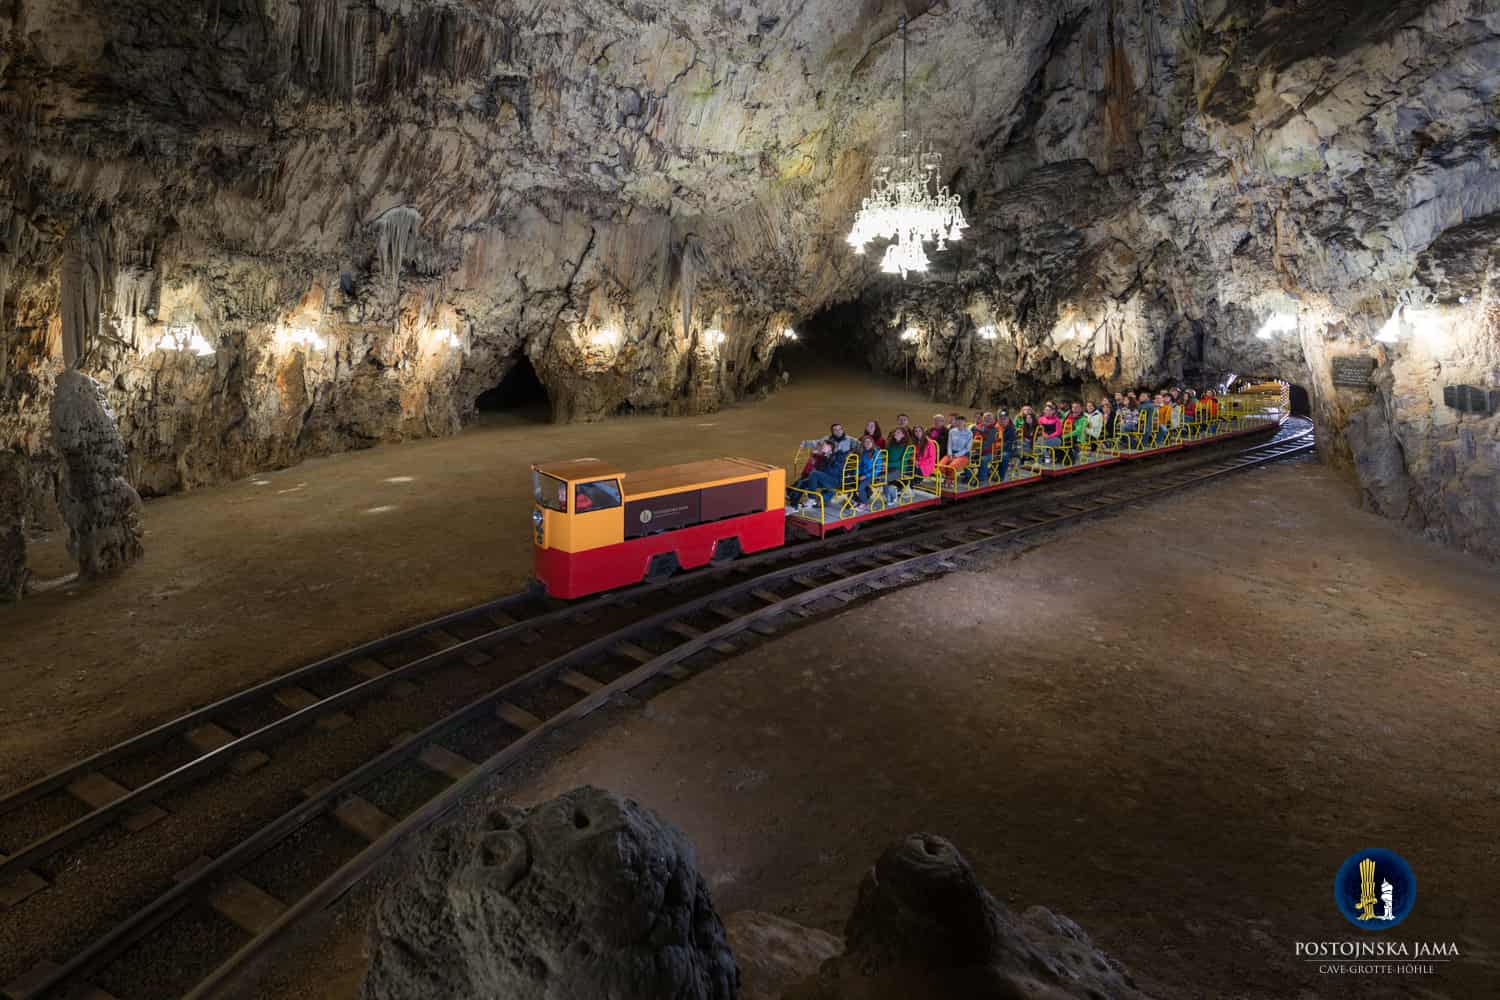 The speedy train ride through Postojna Cave makes a Slovenia cave adventure accessible for travelers of all ages and abilities.